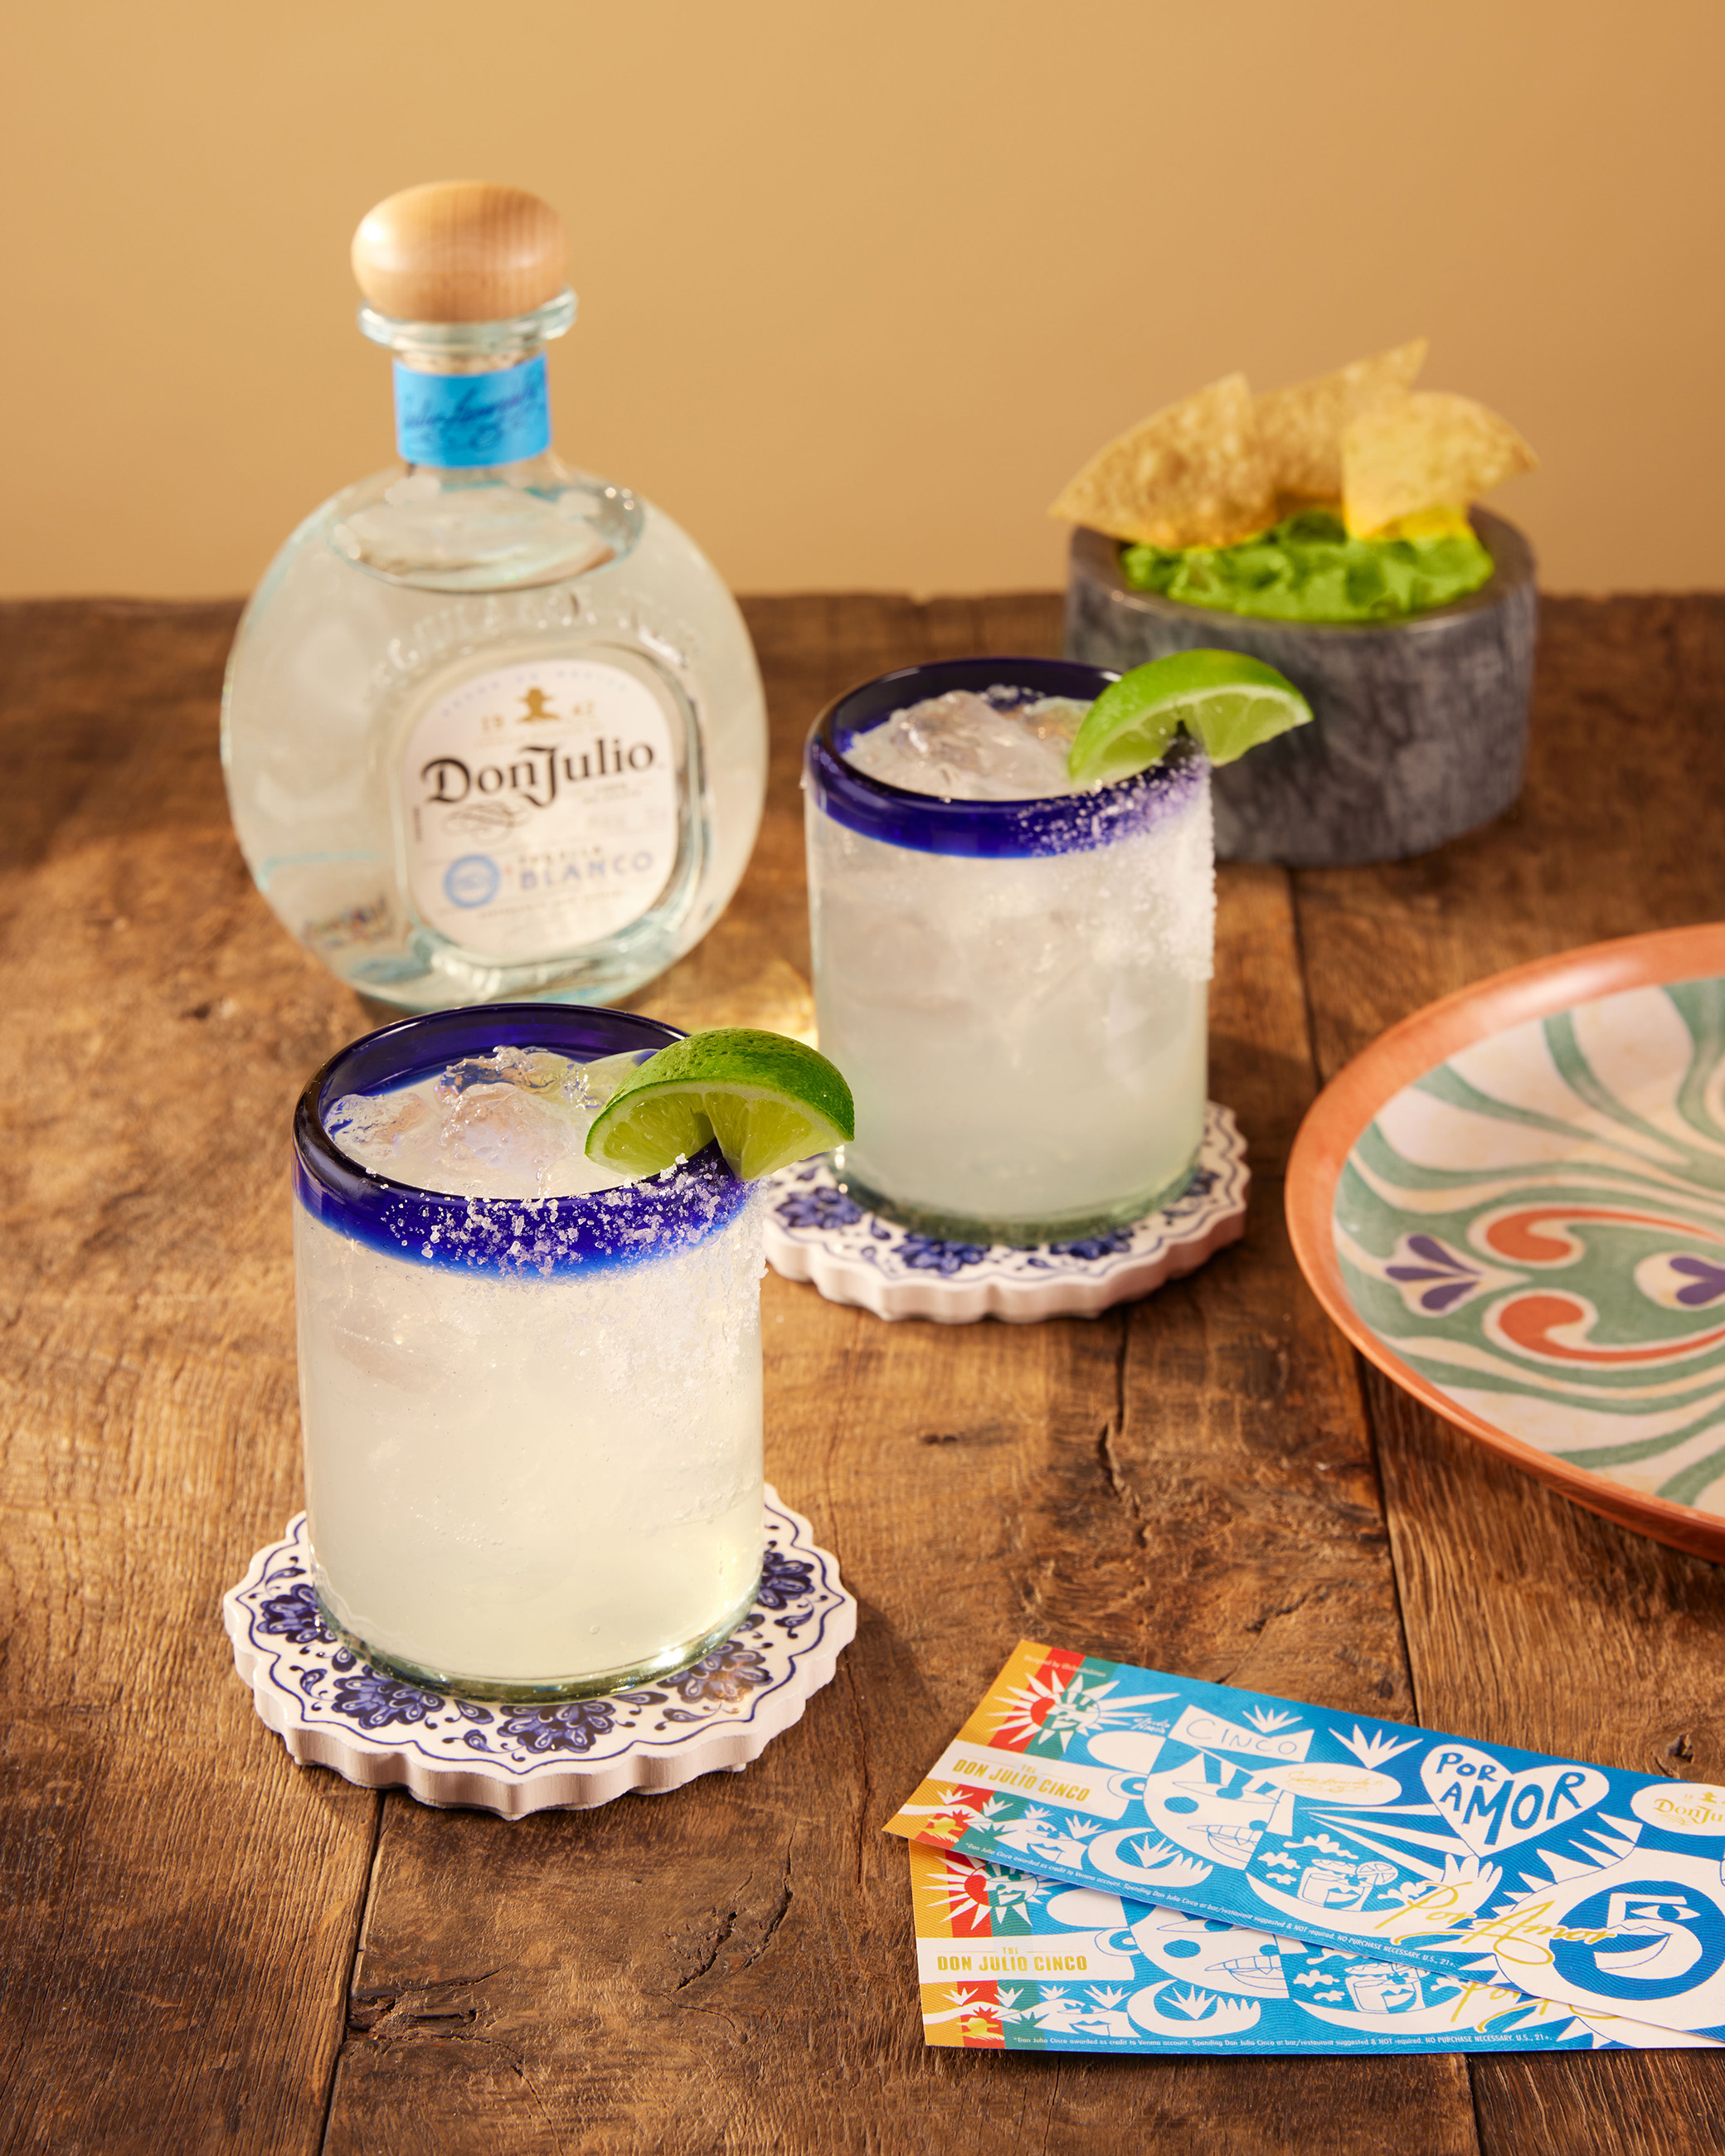 Use the Don Julio Cinco towards a purchase of Tequila Don Julio Blanco that’s perfect for making a delicious margarita, the quintessential cocktail of Cinco de Mayo.